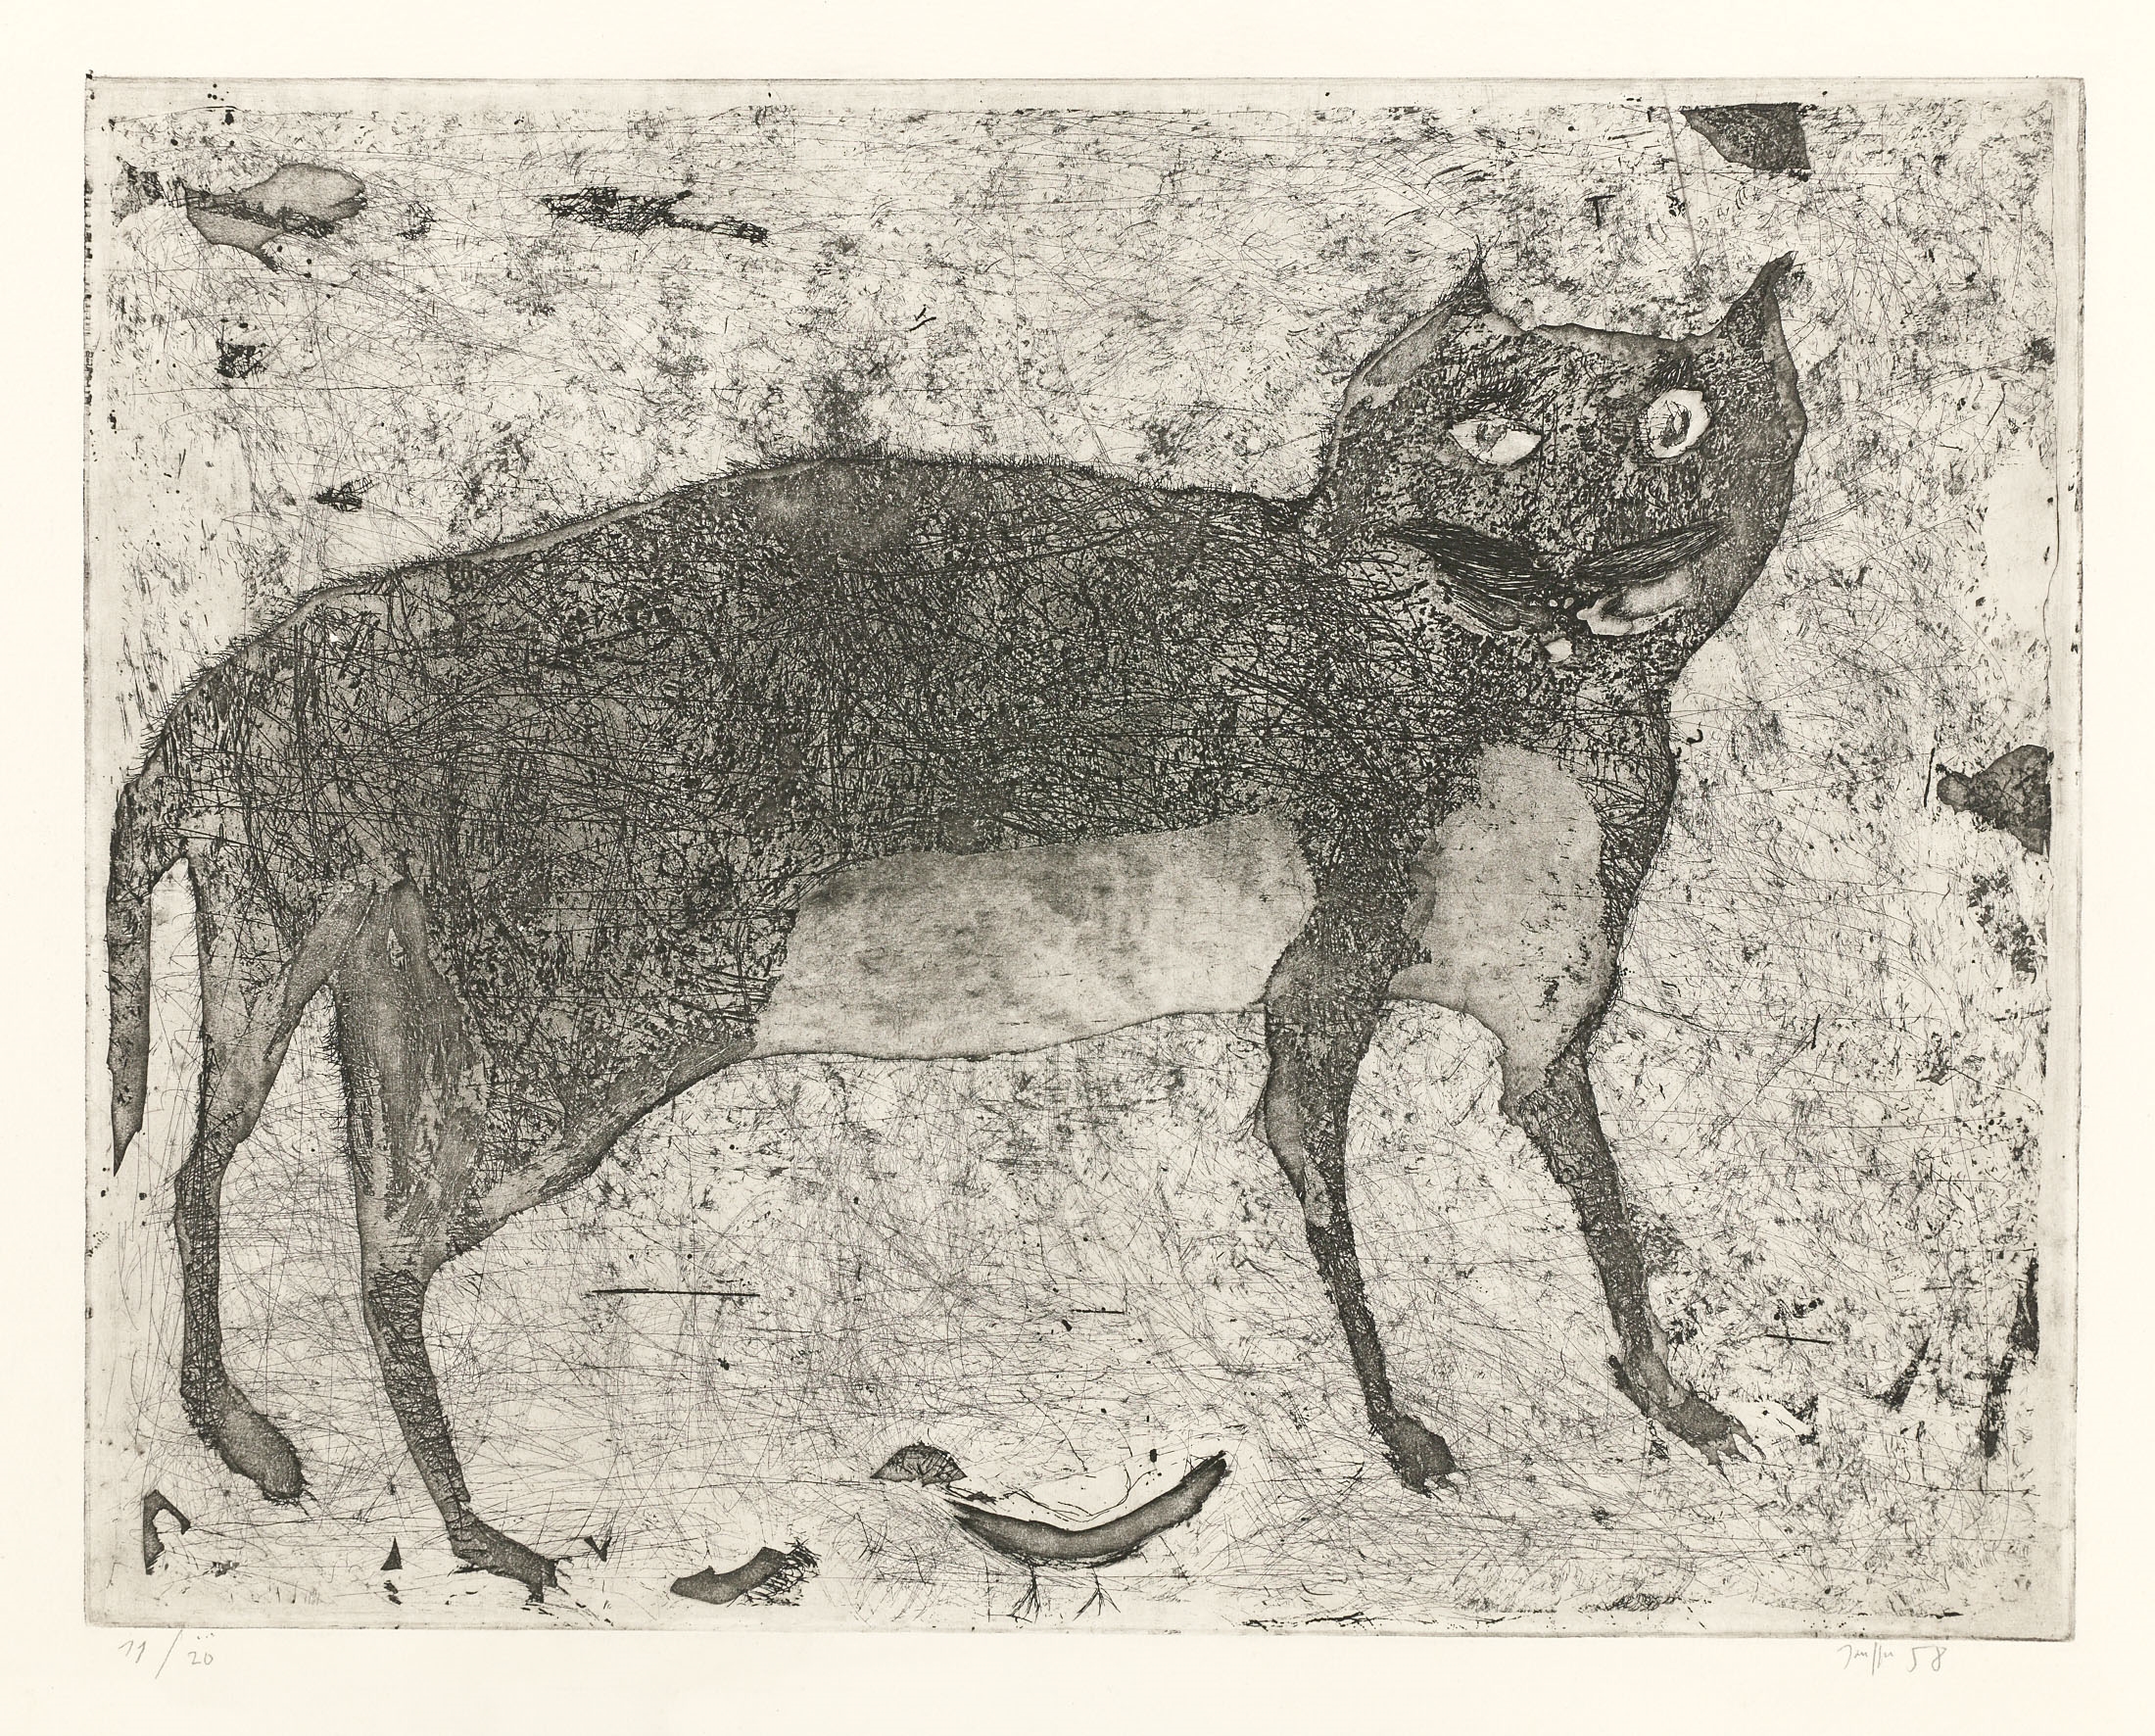 Artwork by Horst Janssen, Katze mit Vogel, Made of Etching and tonal etching on wove paper